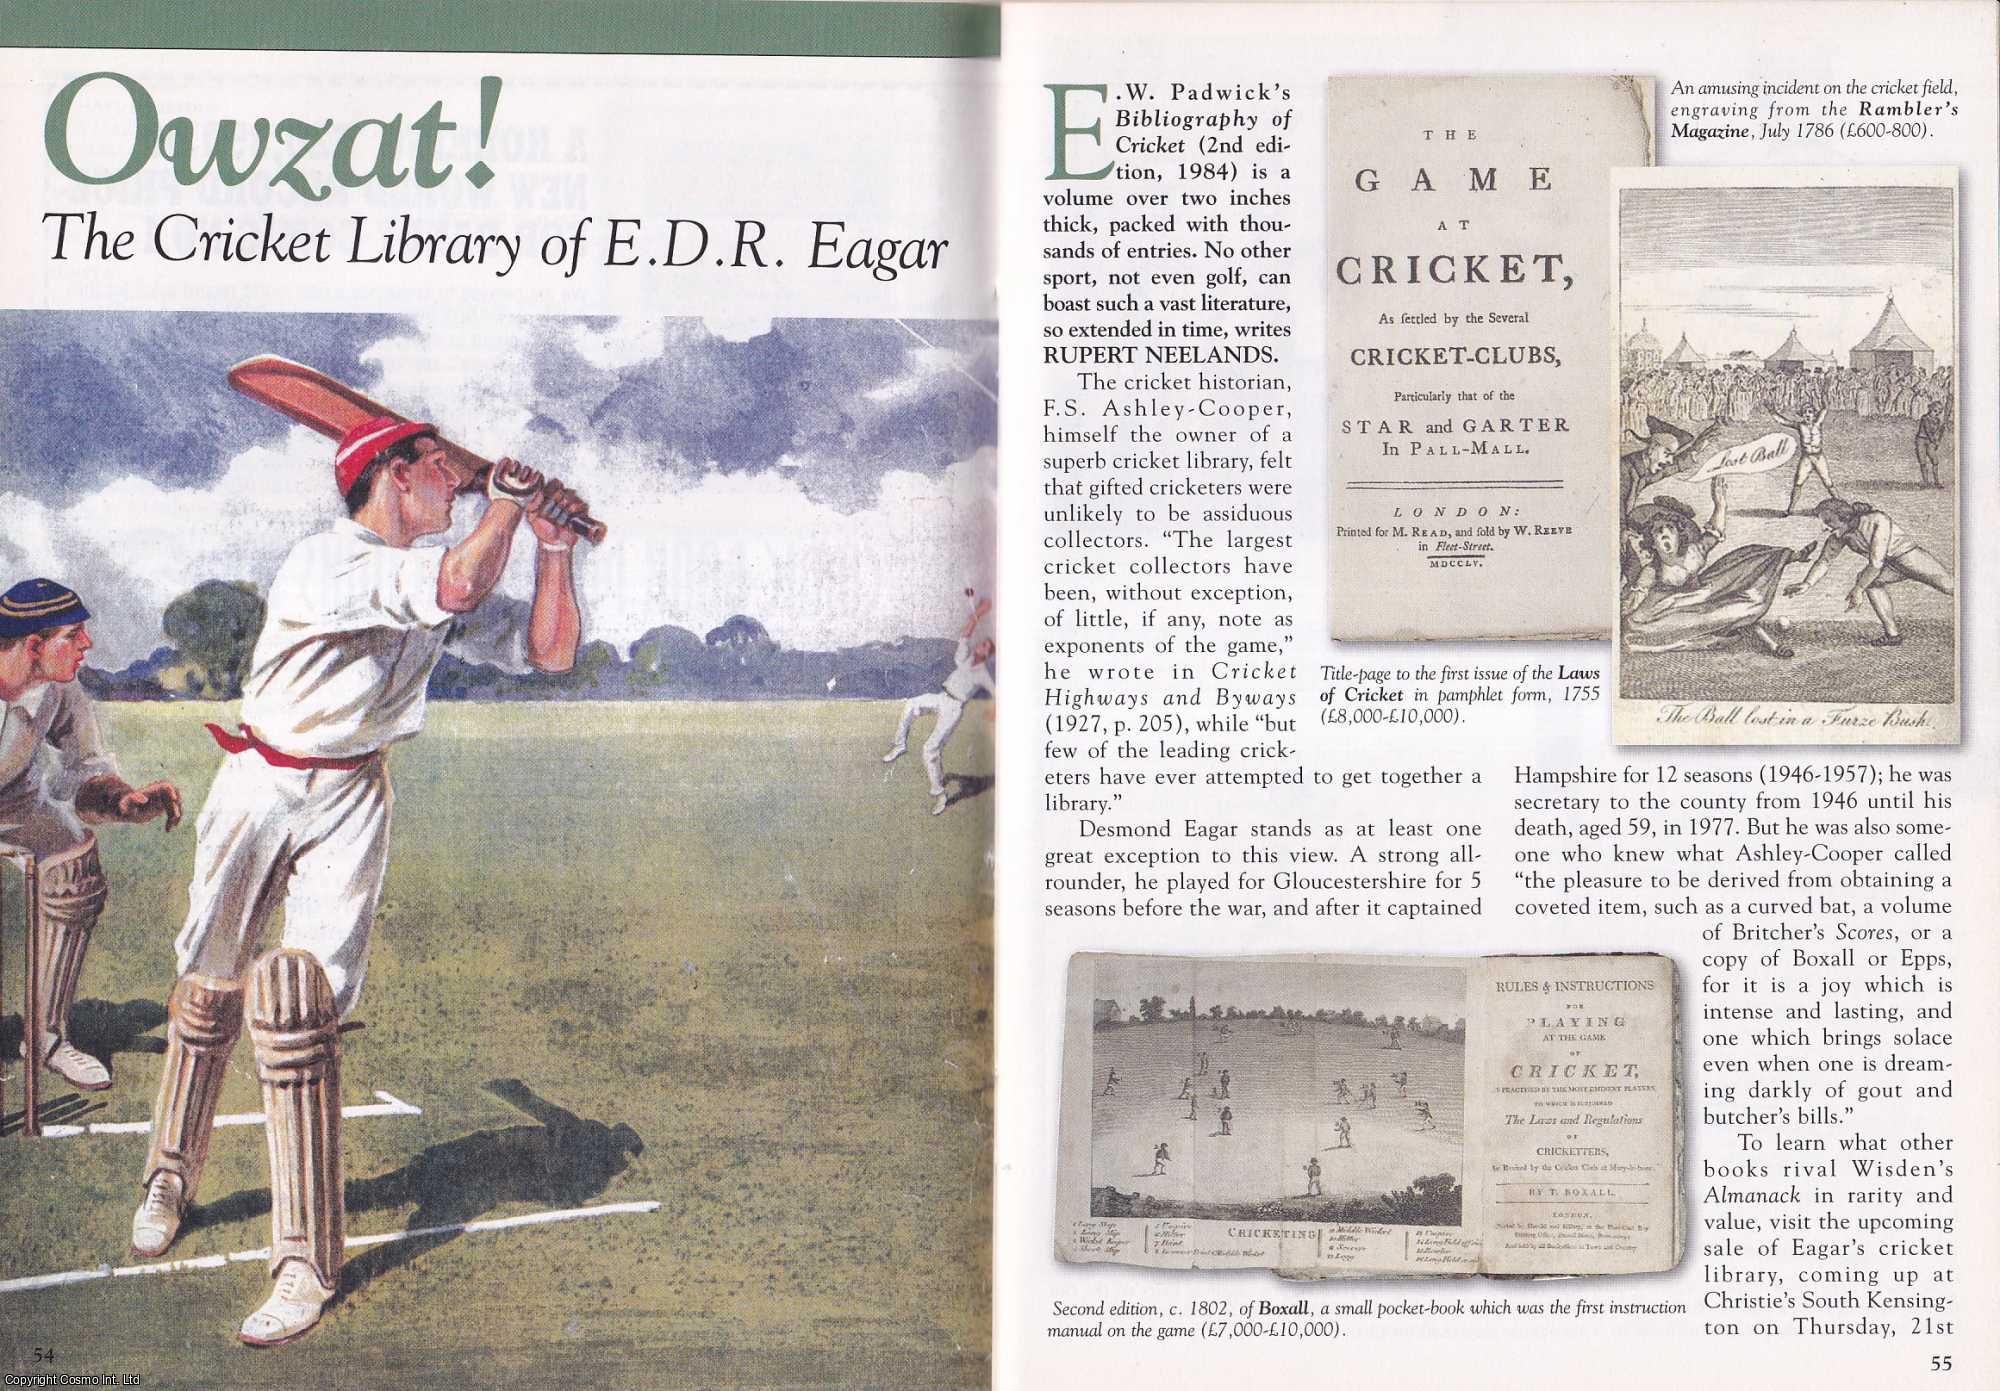 Unstated - Owzat : The Cricket Library of Edward Desmond Russell Eagar. This is an original article separated from an issue of The Book & Magazine Collector publication.